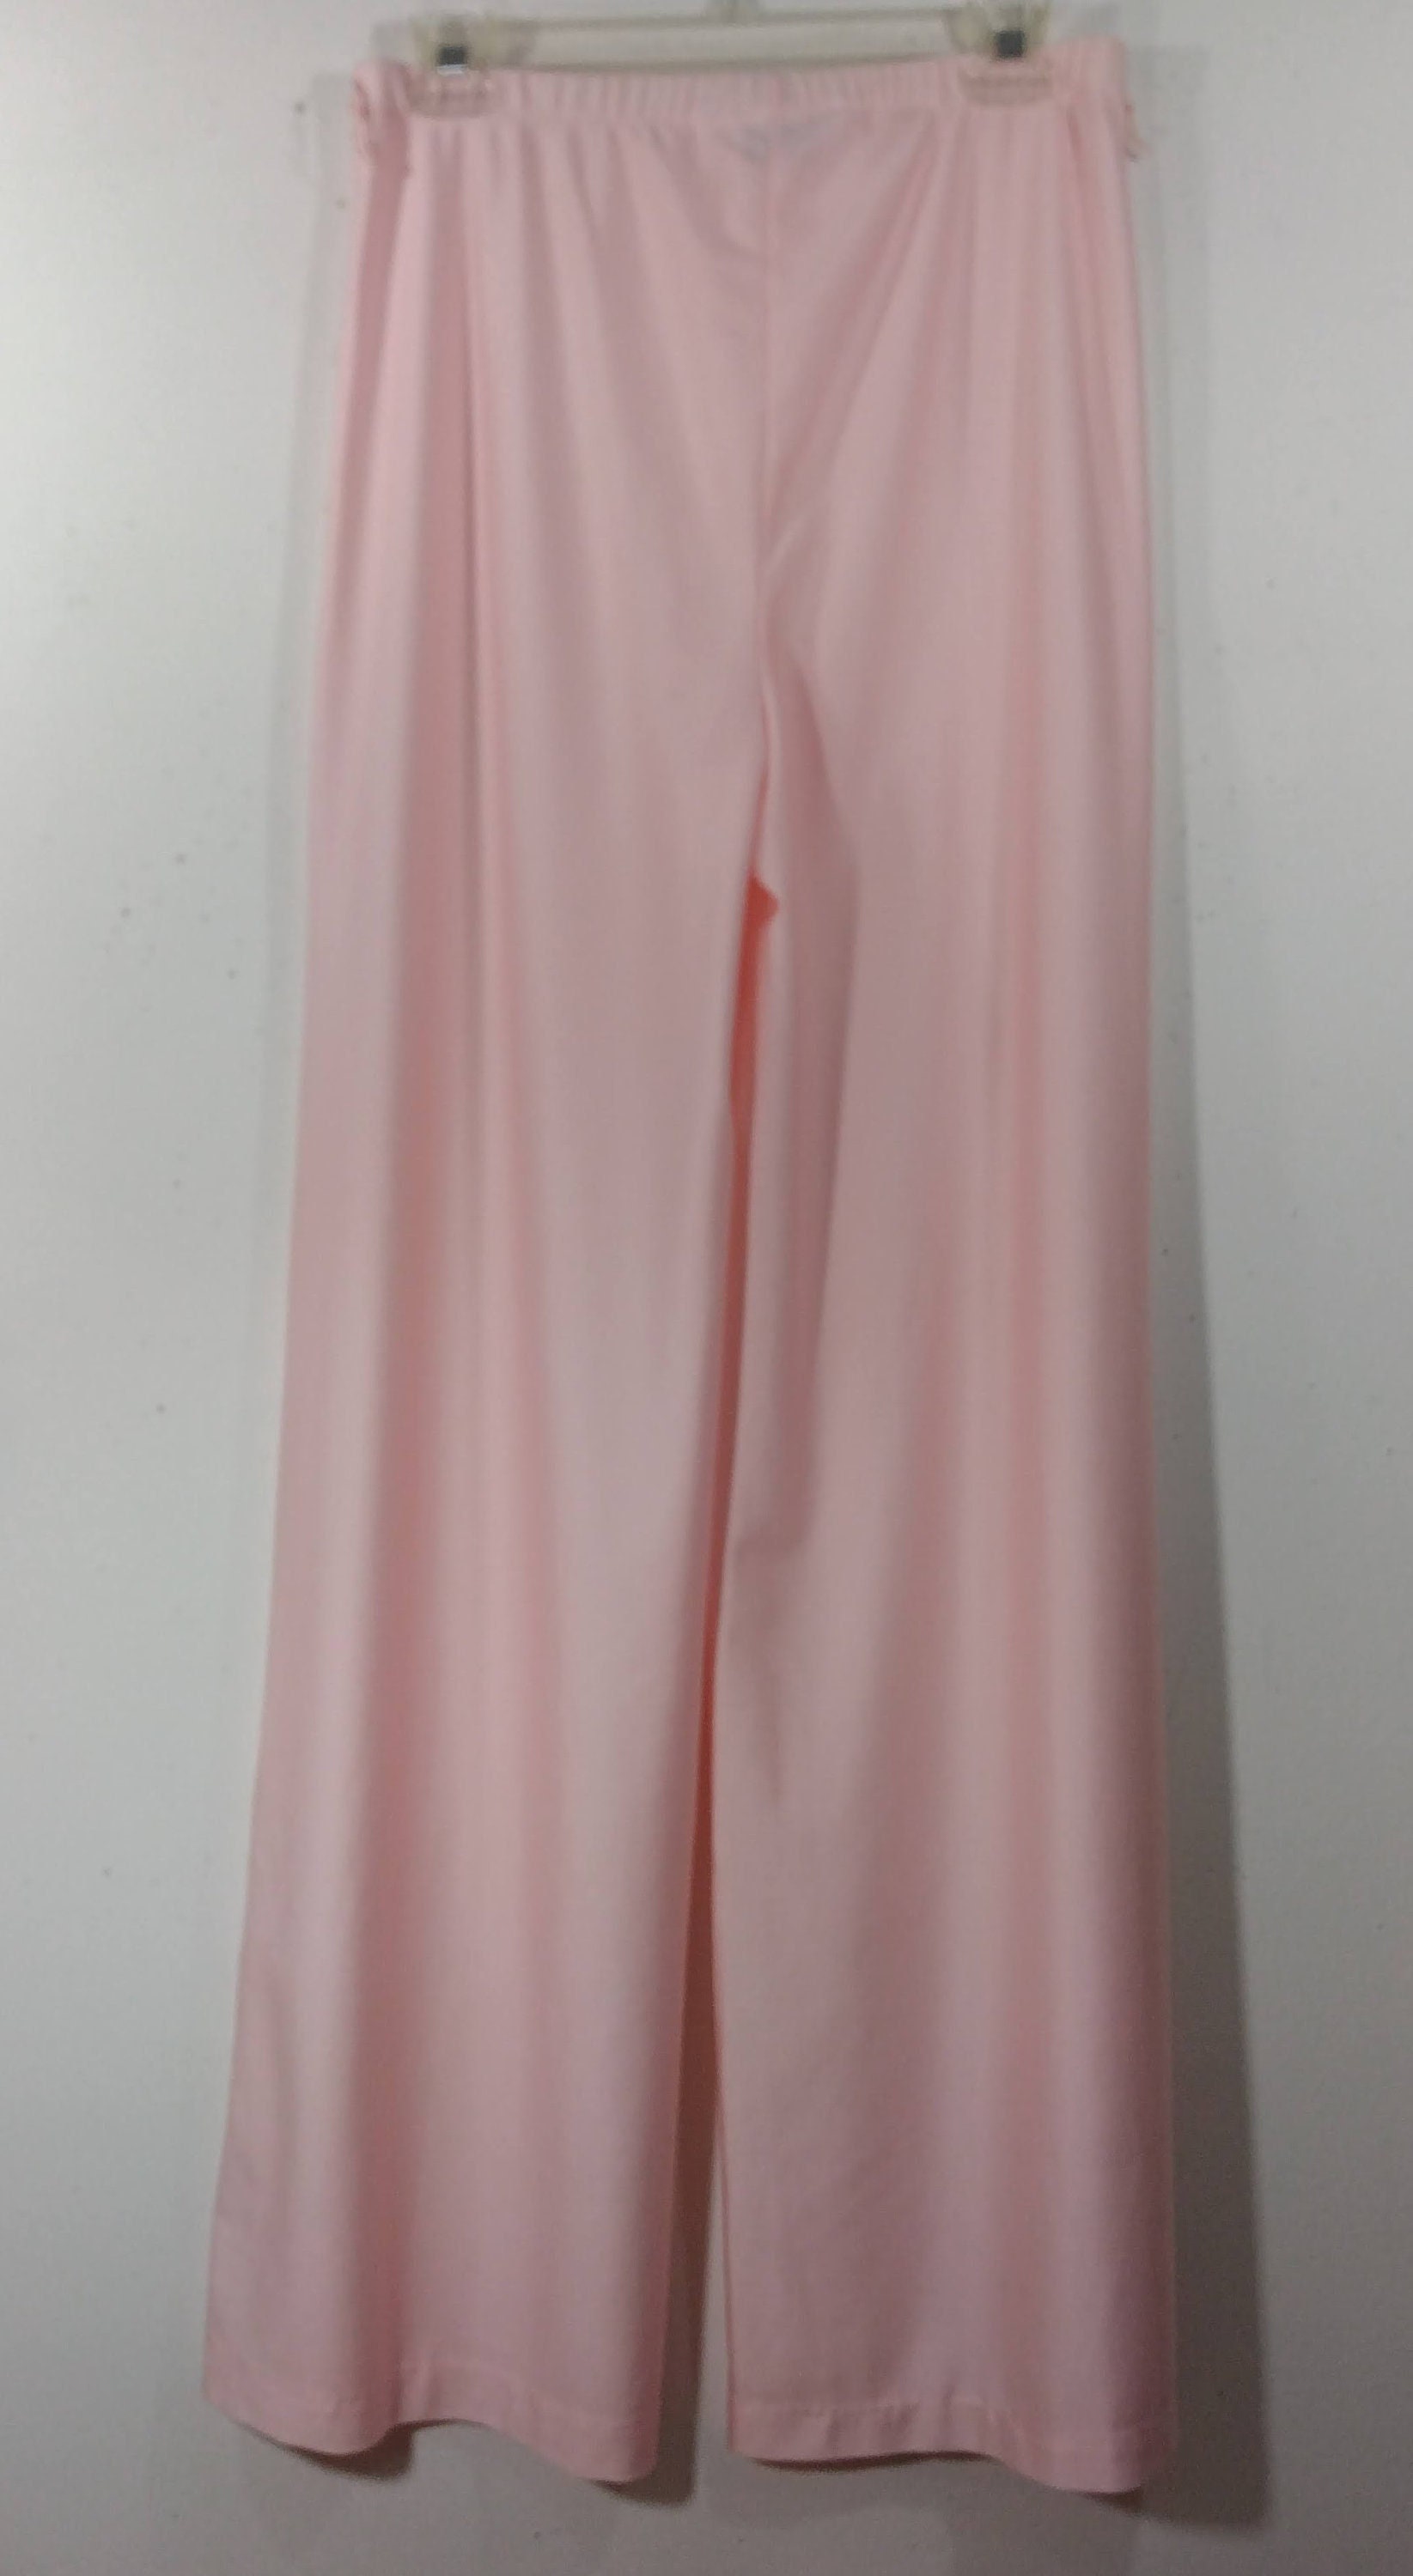 70's Pink Pants Women's Satin Nylon Maxi Full Long Stretchy Elastic Waist  Like New Perfect Condition Vintage by JC PENNEY Qiana Size M -  Canada